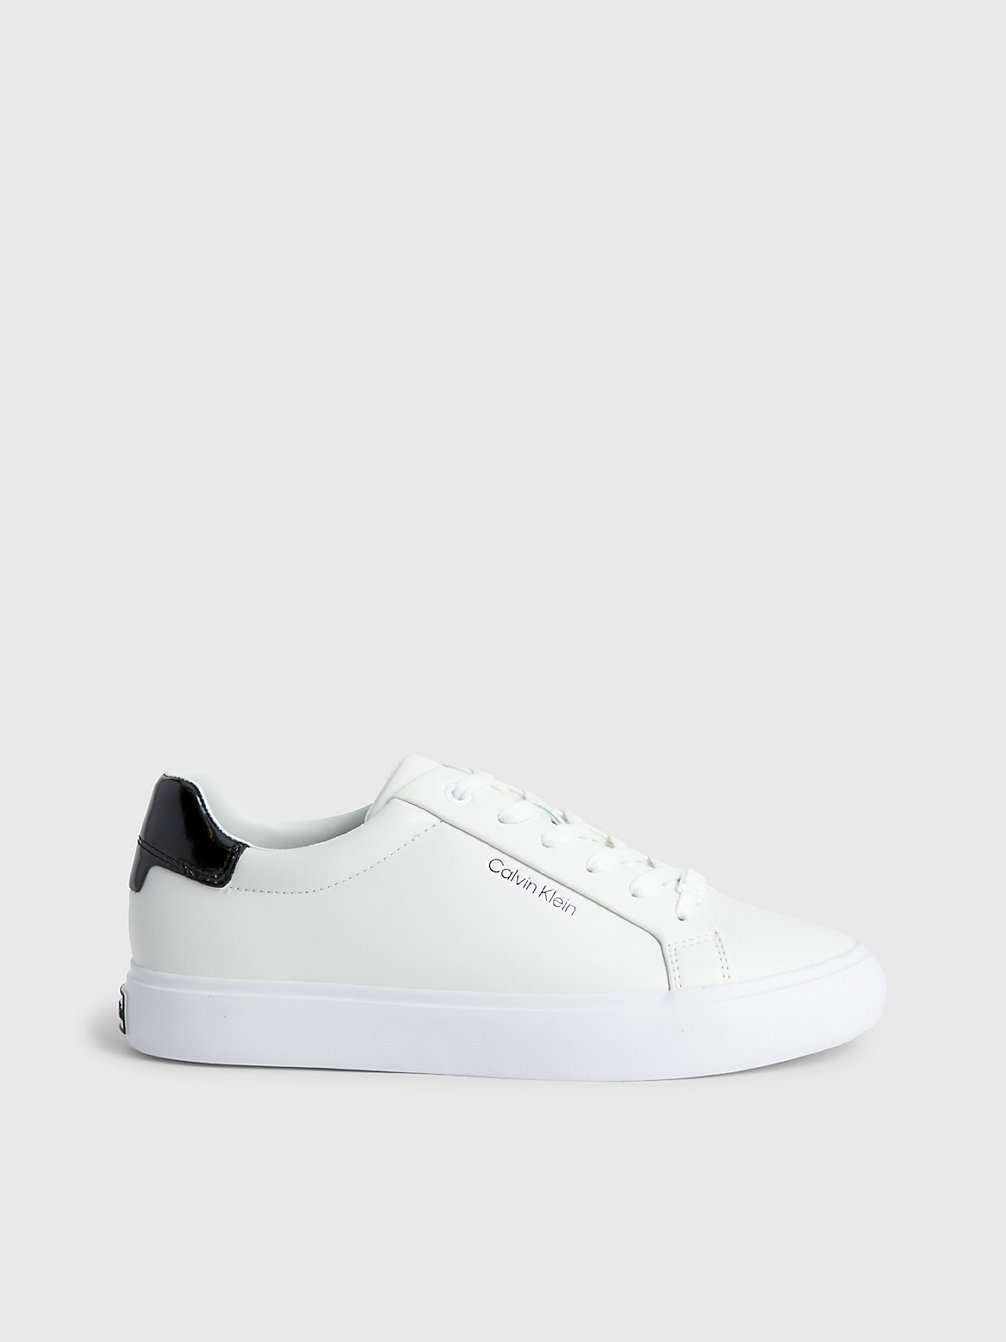 WHITE/BLACK Leather Trainers undefined women Calvin Klein